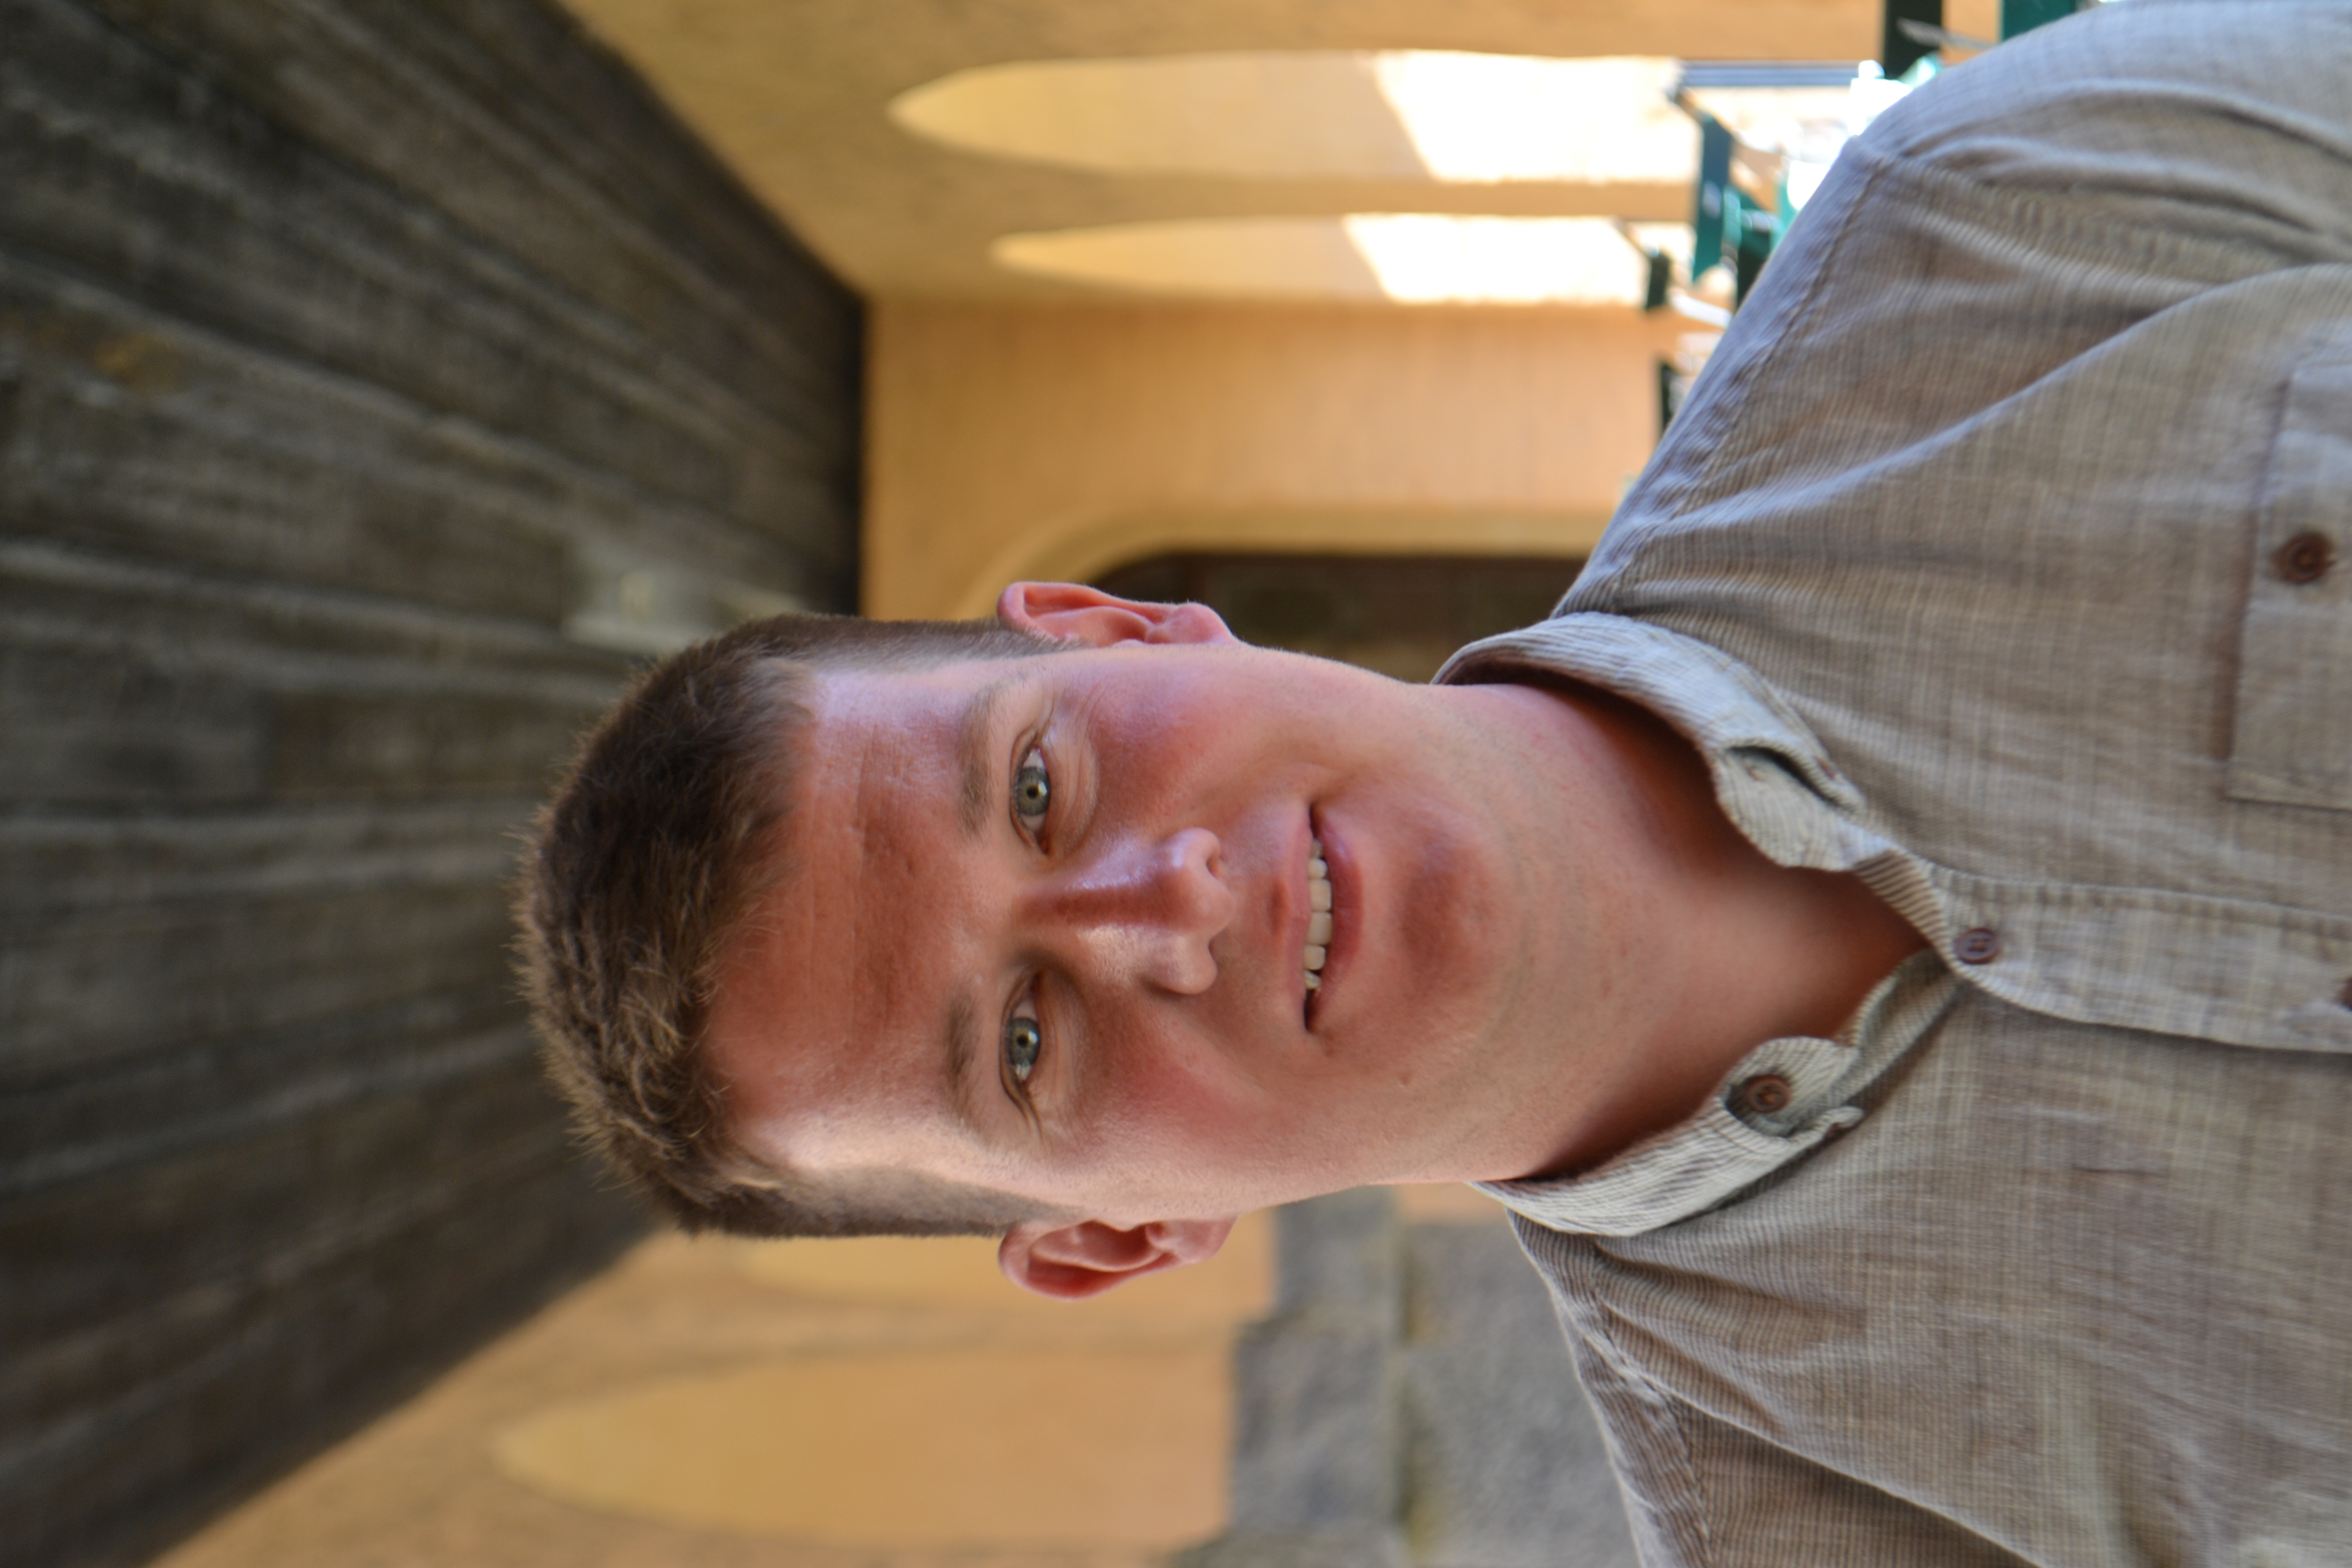 Photograph of Andrew Burchell taken against backdrop of orange painted cloisters and green patio furniture.